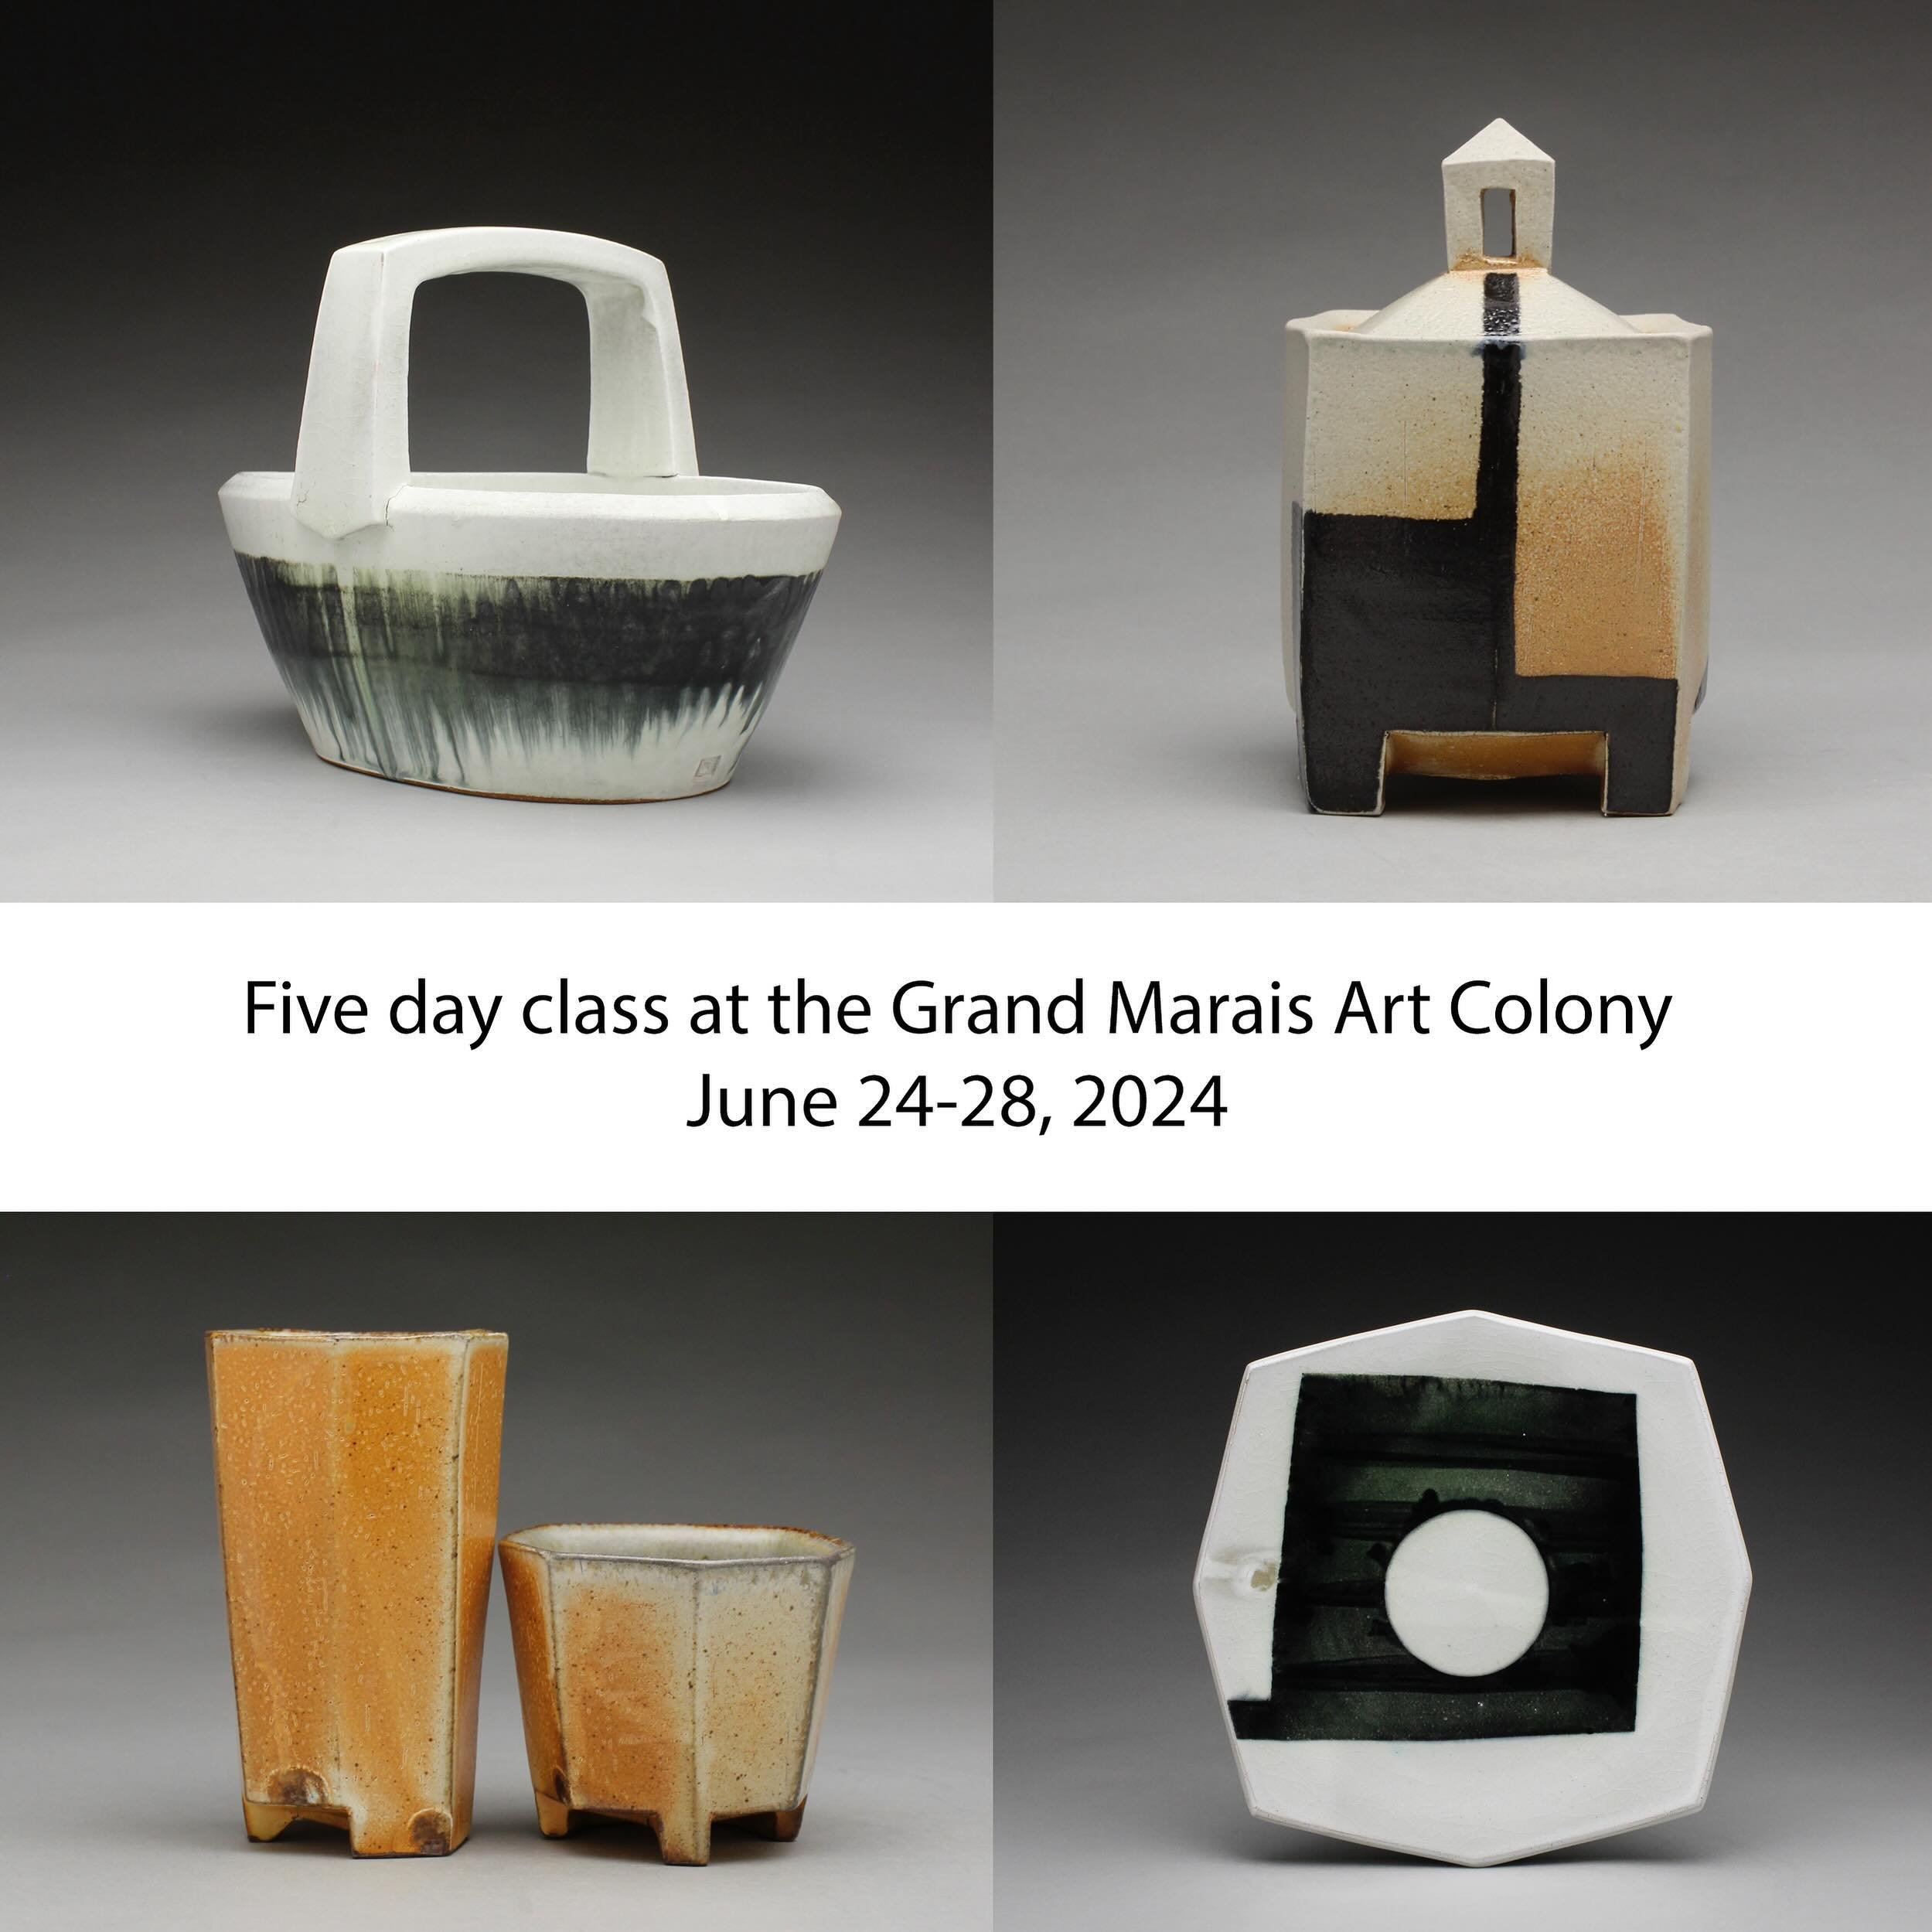 The Grand Marais Art Colony is hosting me for a five-day class in Grand Marais, MN. The class will focus on throwing various forms and altering them off the wheel. &ldquo;Thinking Through Process: Altering the Thrown
Form&rdquo; June 24-28, 2024. For